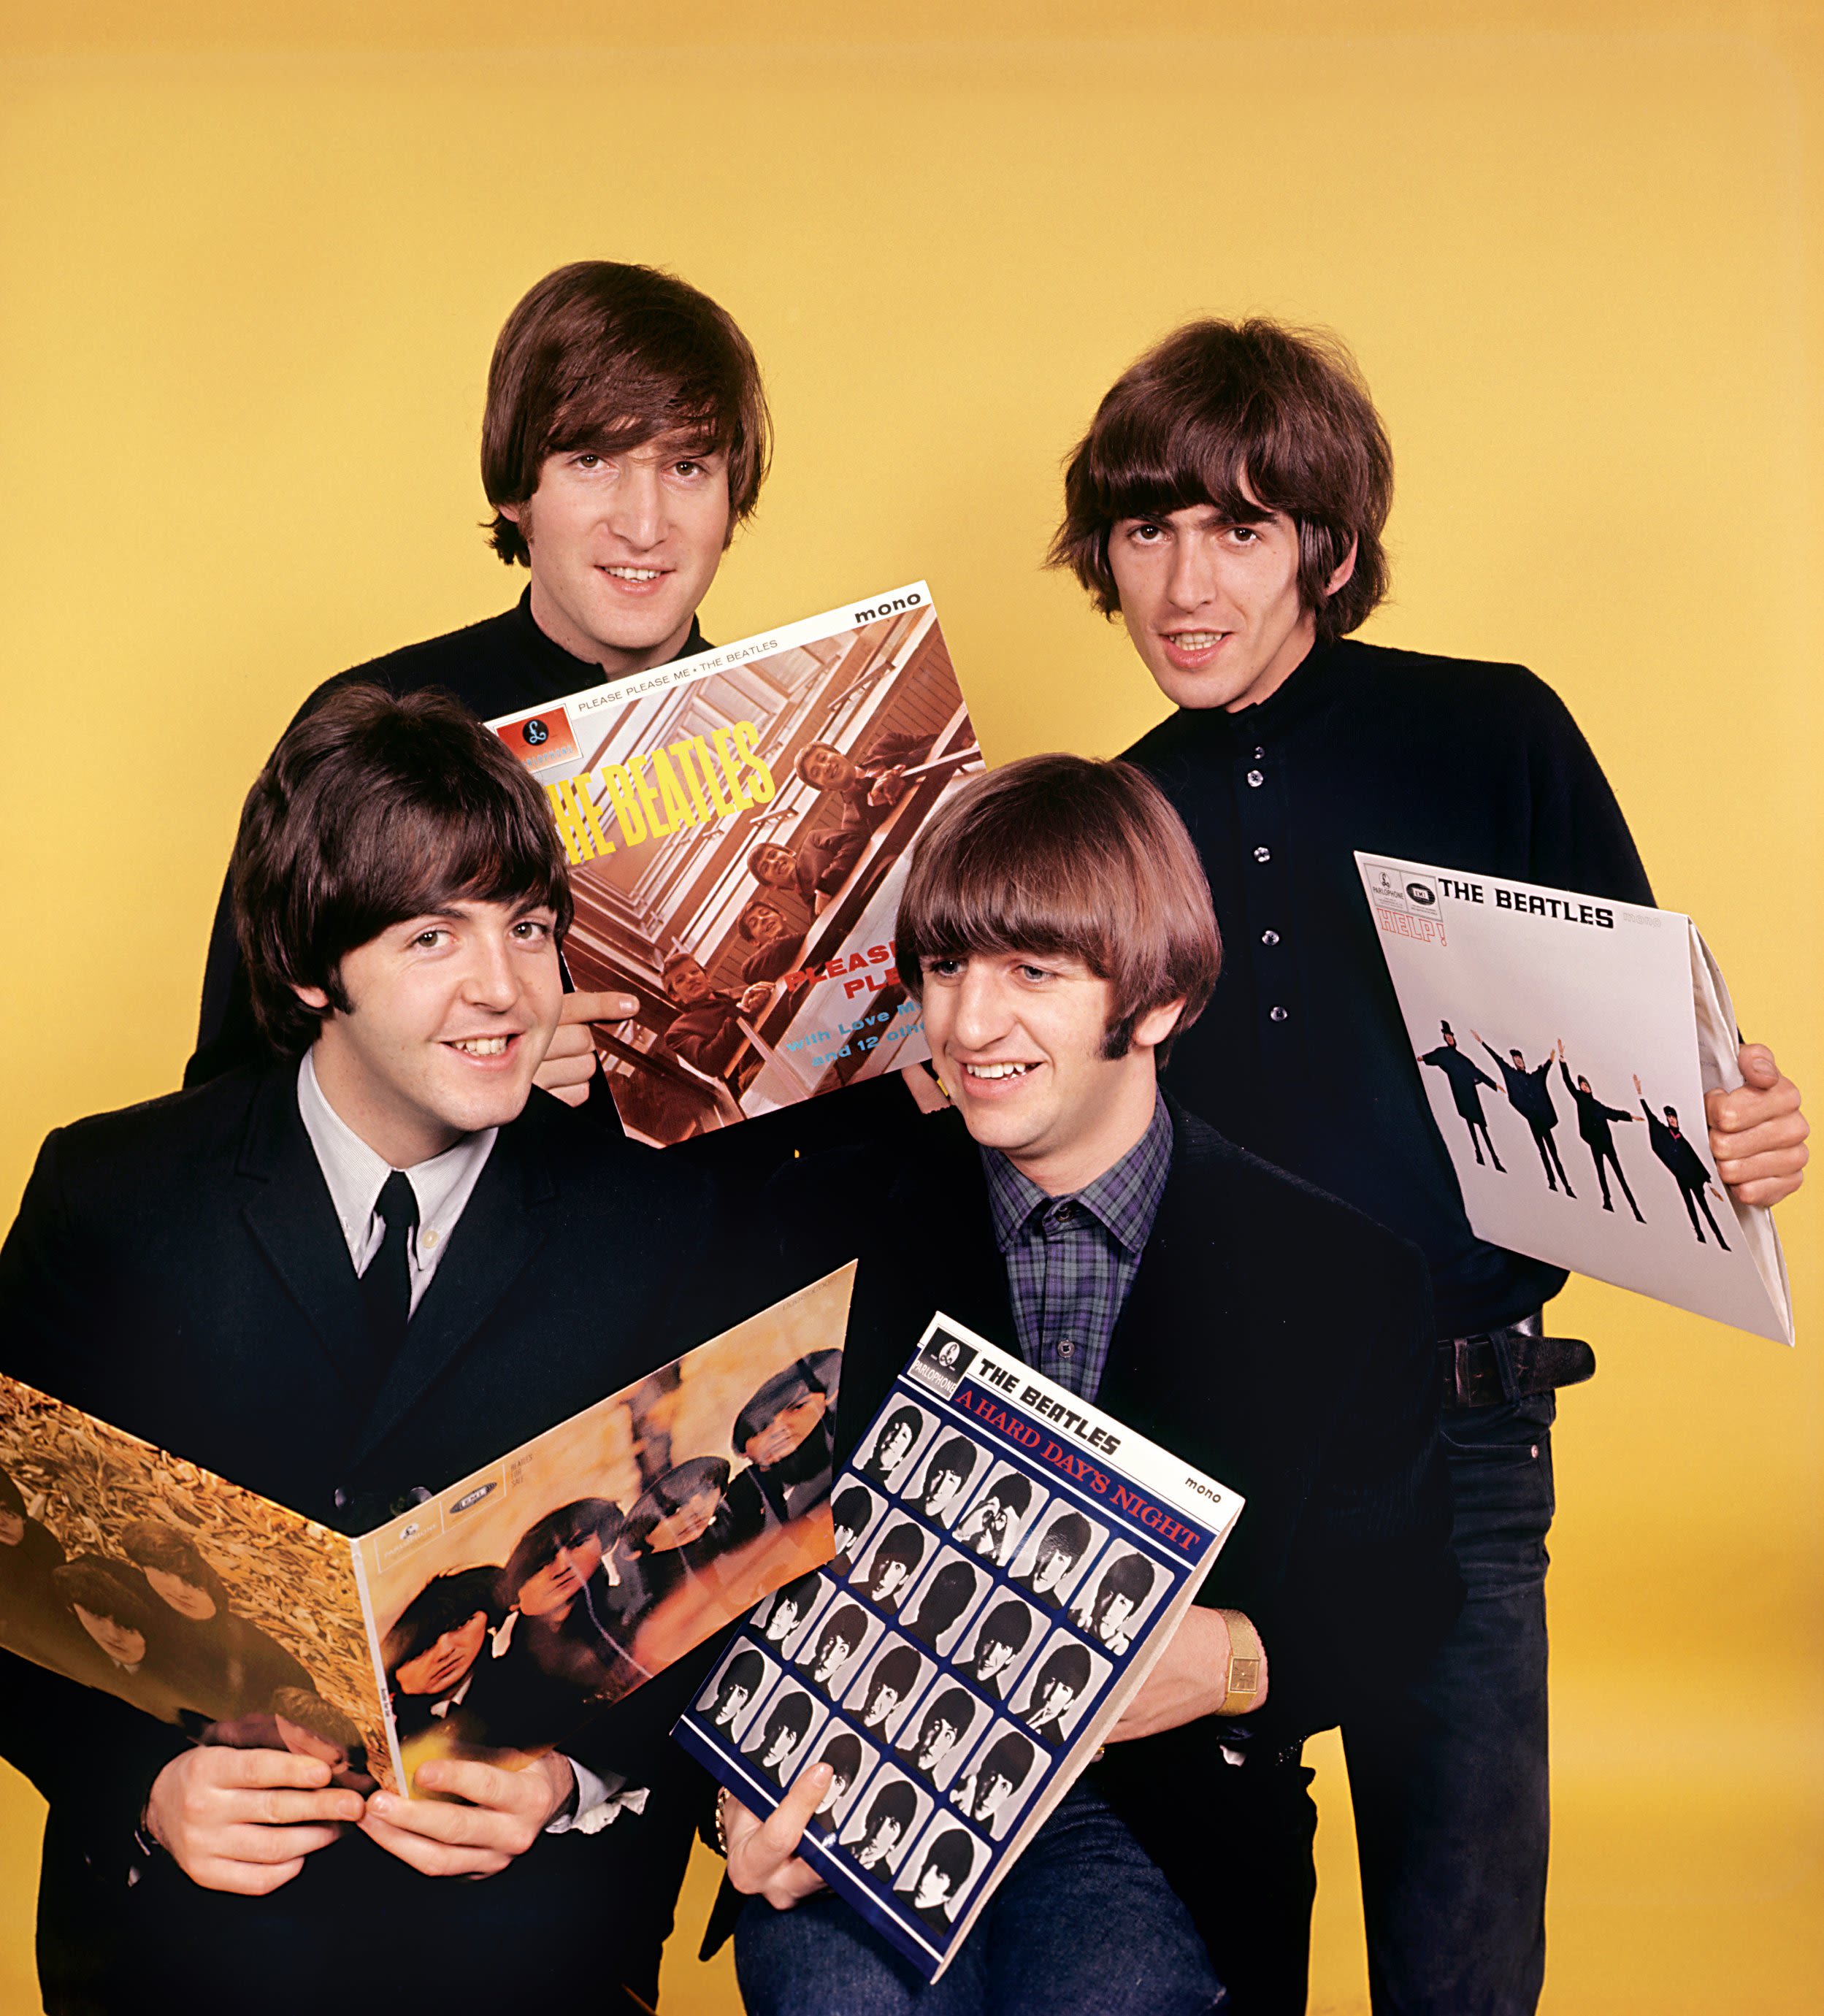 The Beatles of myth, the Beatles of reality